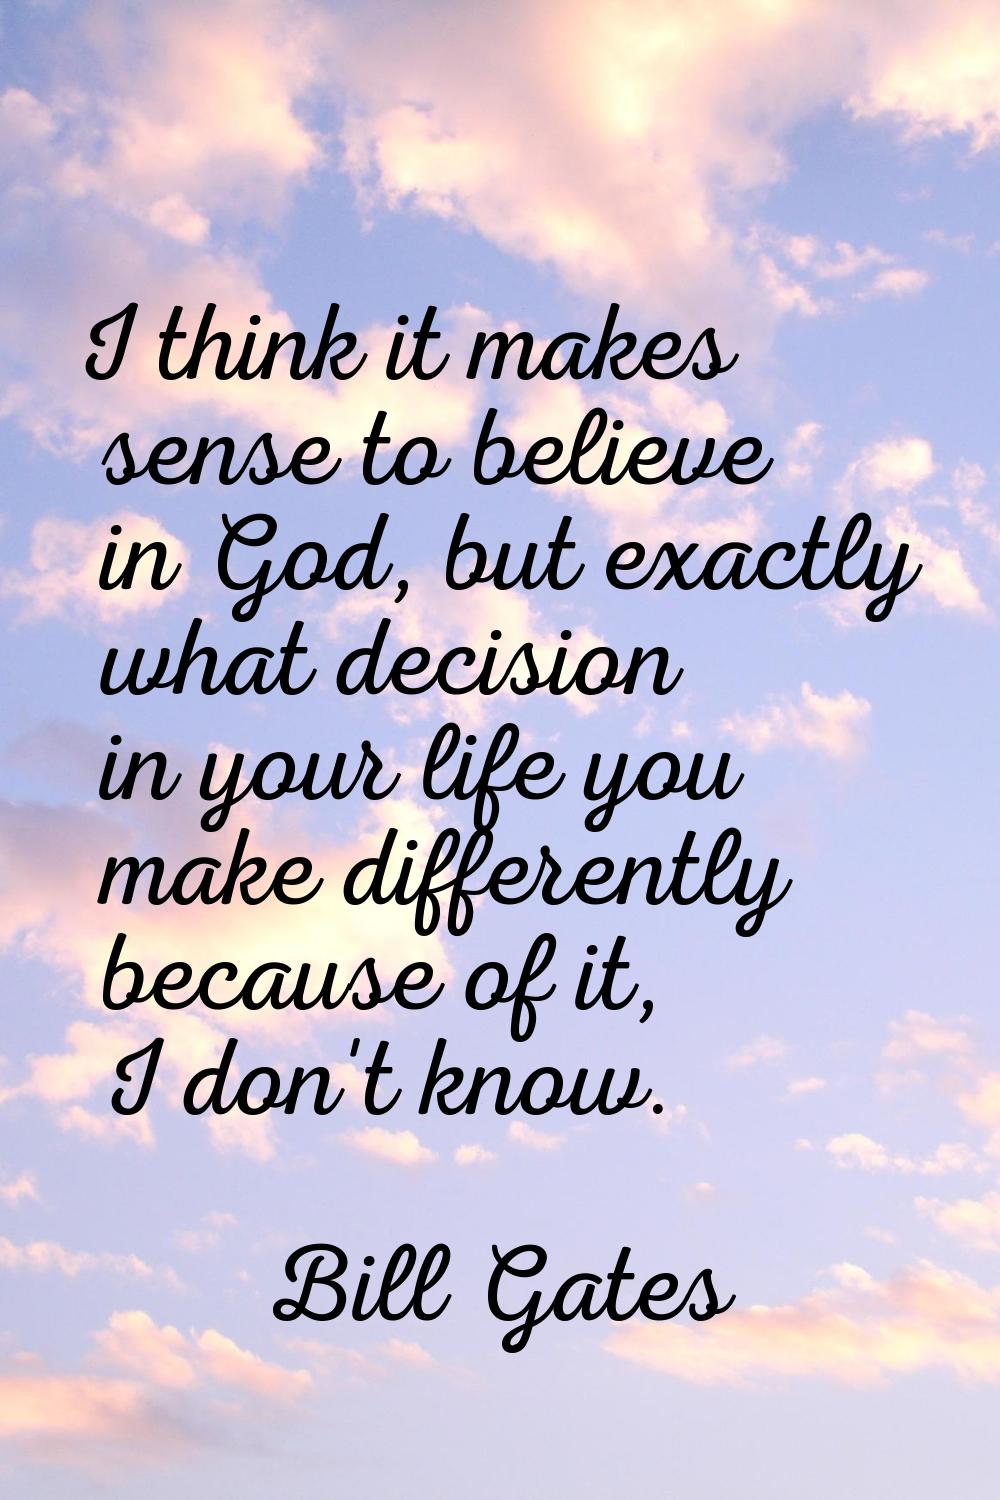 I think it makes sense to believe in God, but exactly what decision in your life you make different